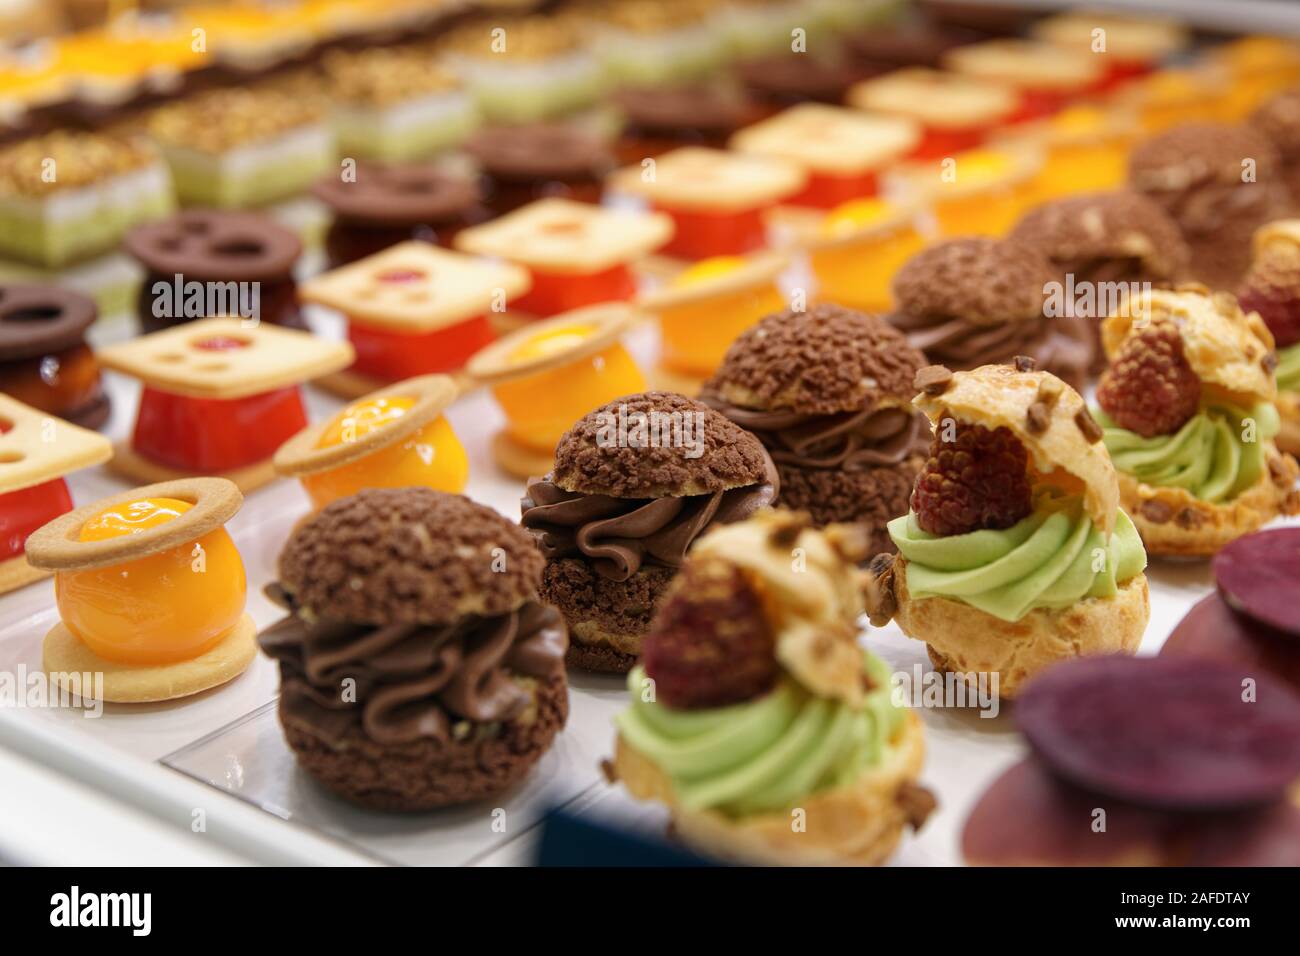 Various sweet items in window display in bakery or supermarket, close-up Stock Photo